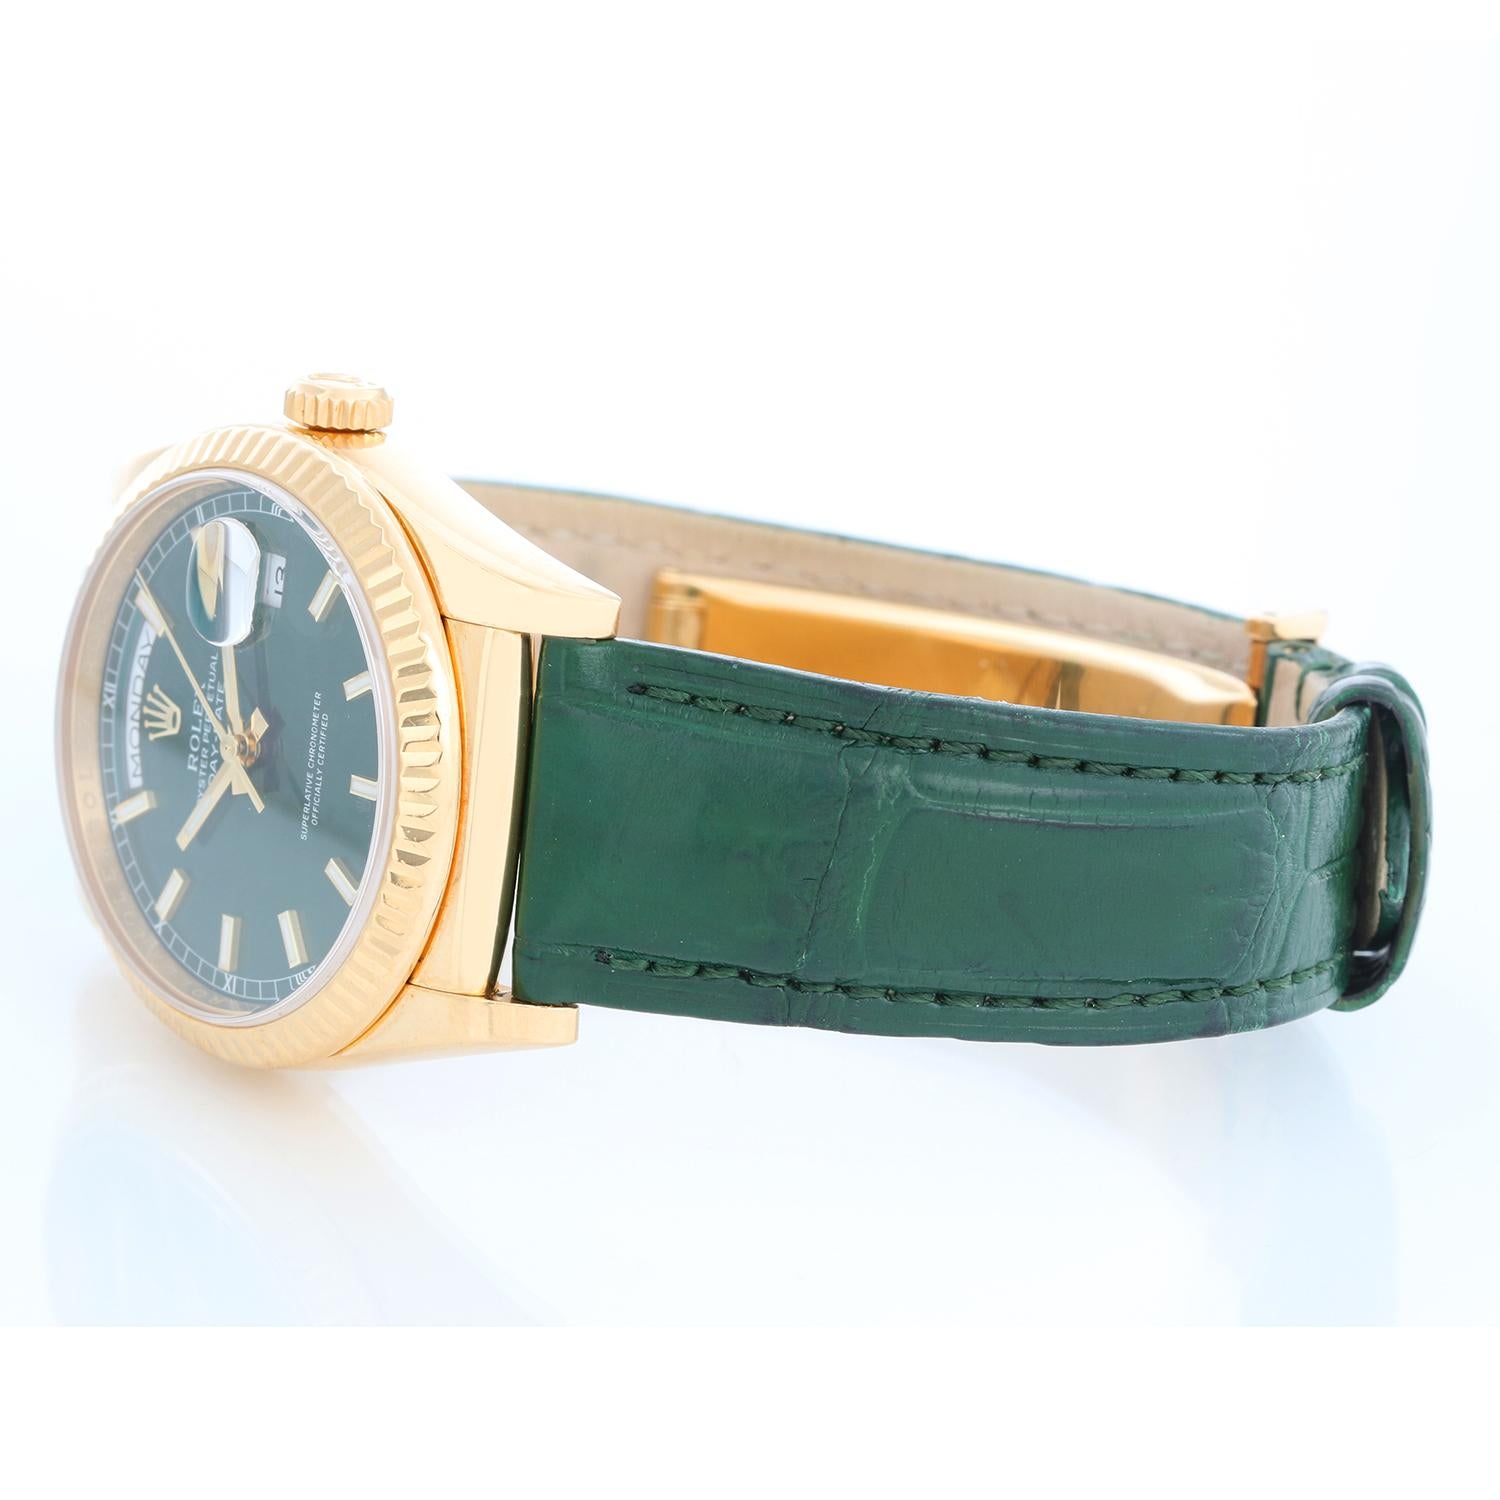 Rolex Day-Date 36 President 18K Yellow Gold Men's Watch 118138 - Automatic. 18K Yellow Gold with fluted bezel  ( 36 mm ). Green dial with stick hour markers. Green Alligator Strap with 18K Yellow Gold Deployant Buckle. Pre-owned with Rolex box and